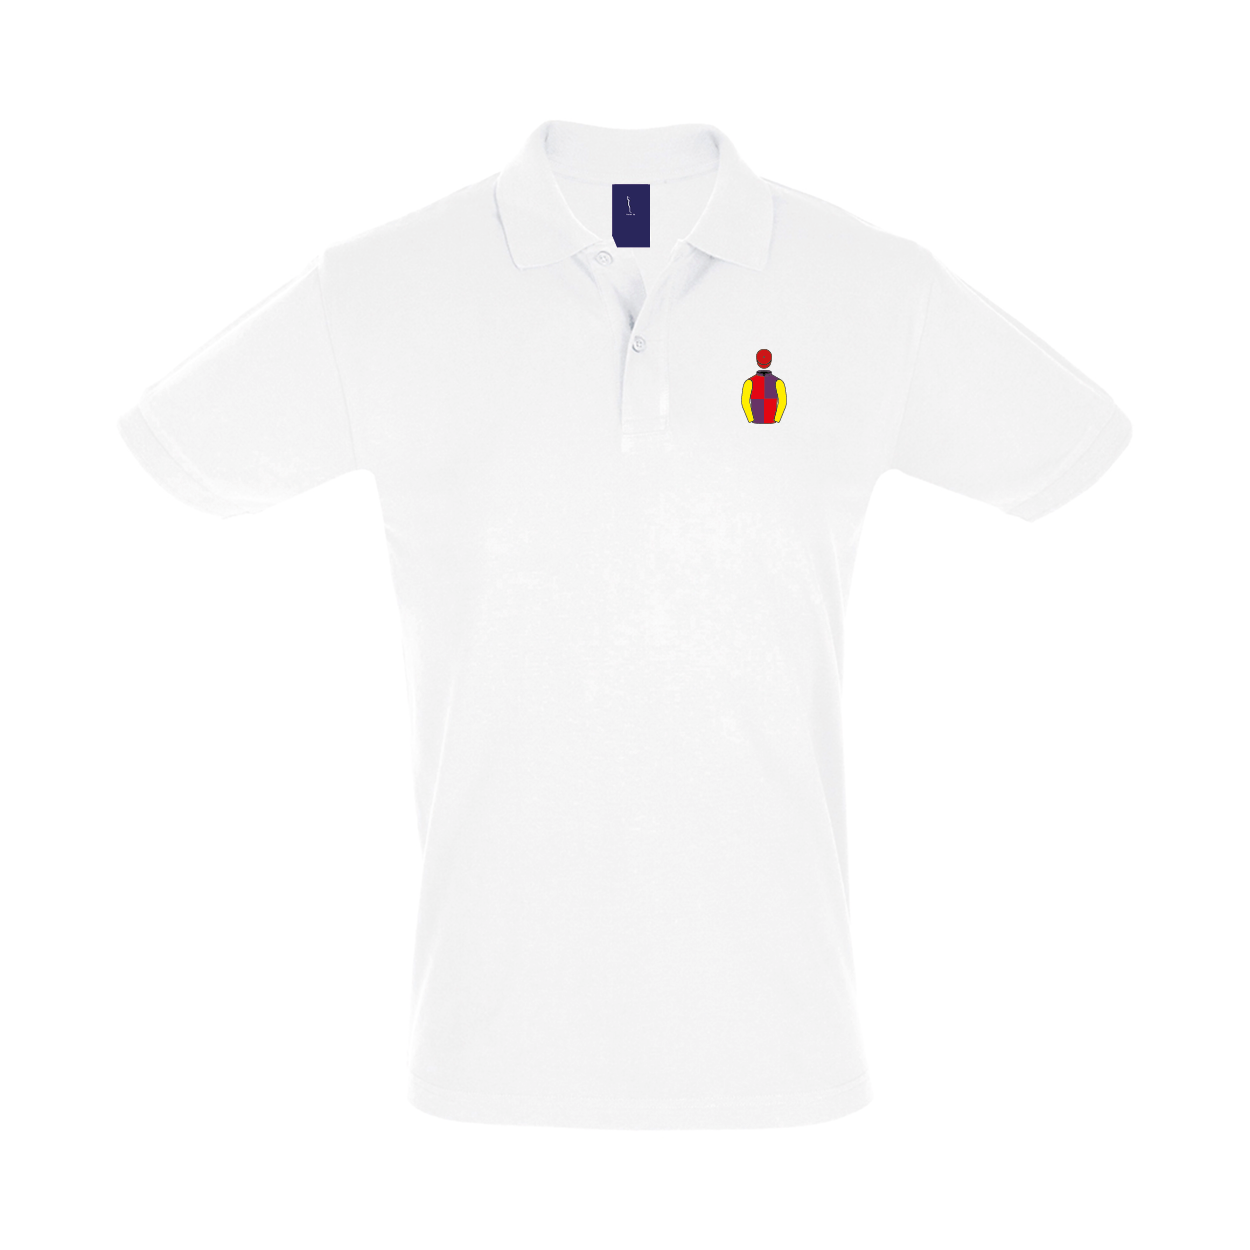 Ladies Brocade Racing Embroidered Polo Shirt - Clothing - Hacked Up